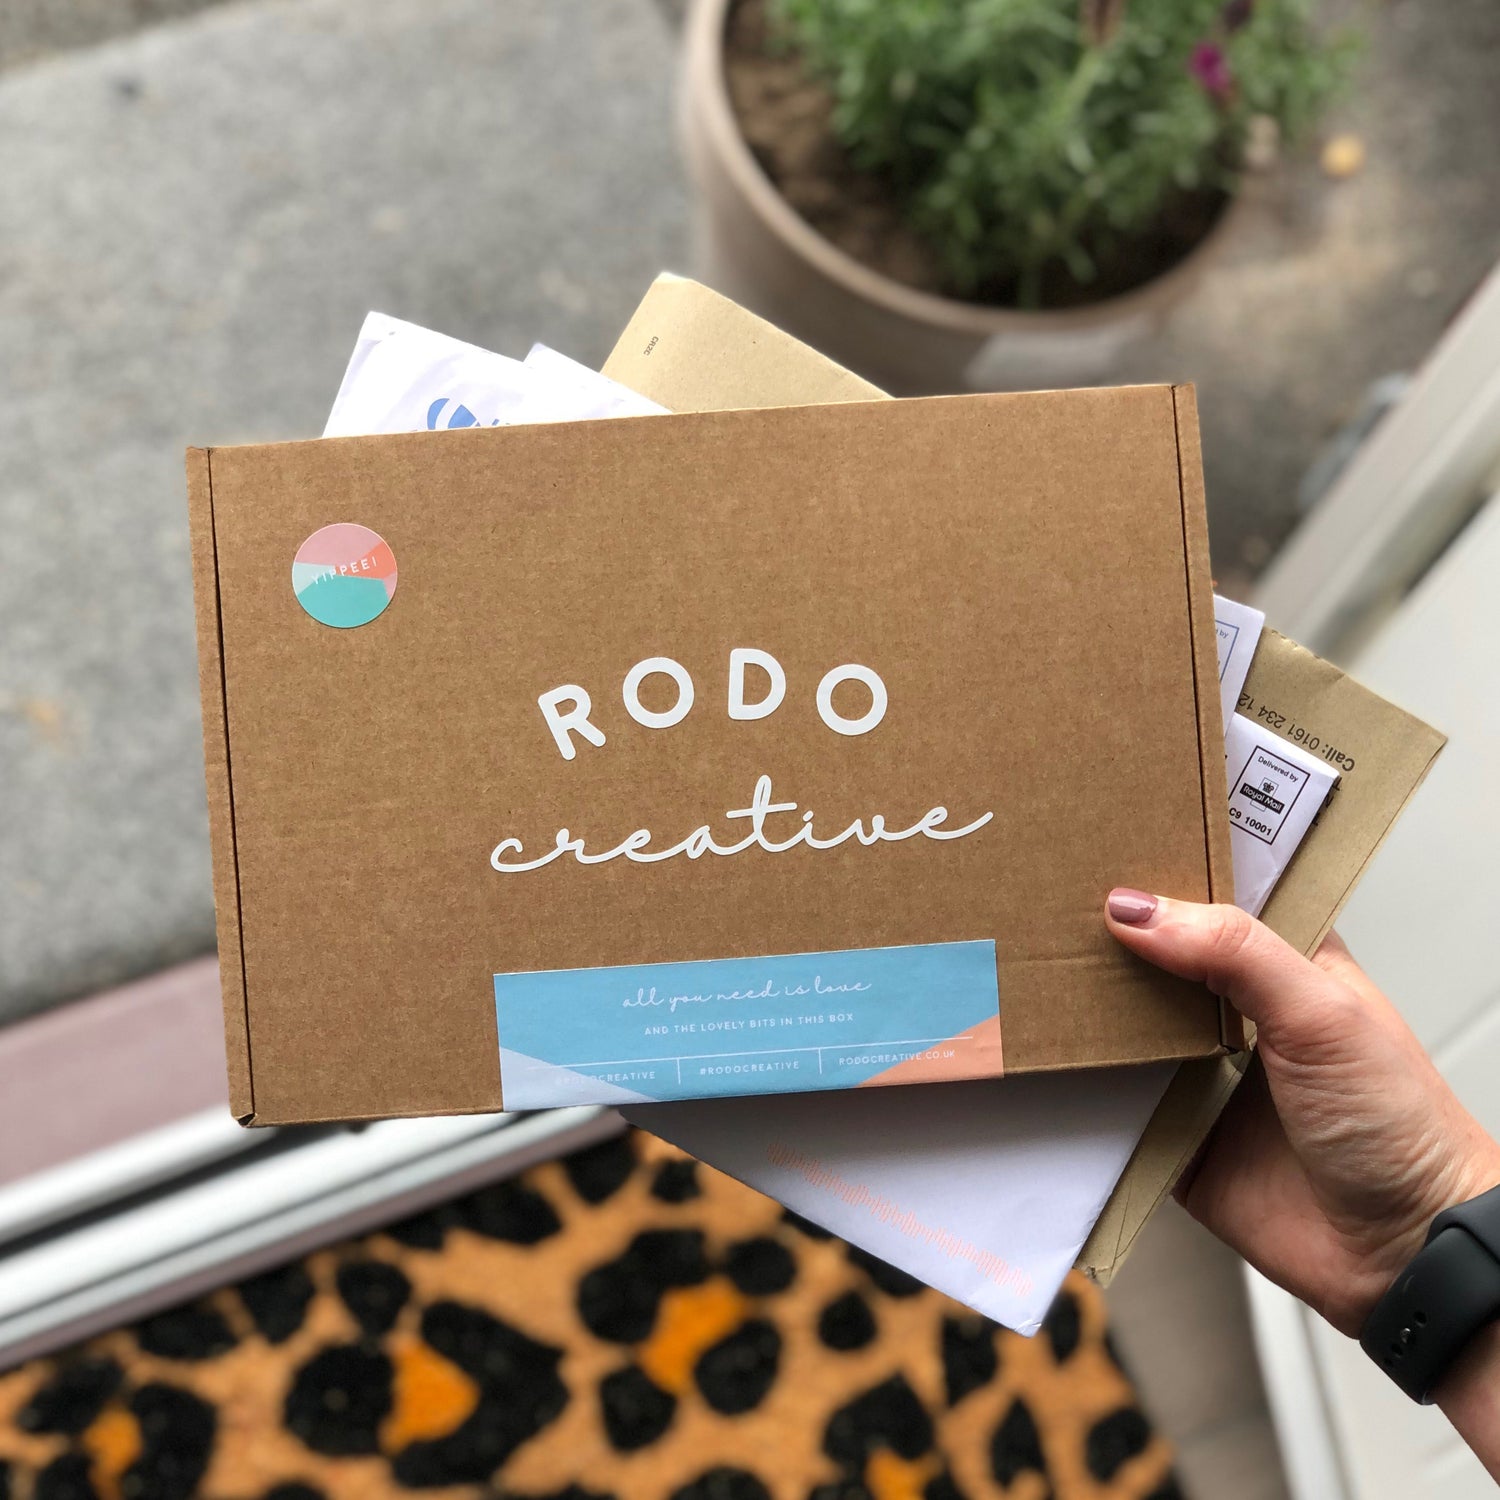 Rodo Creative Packaging Design for Greeting cards, Paper good, Scratch cards and design 